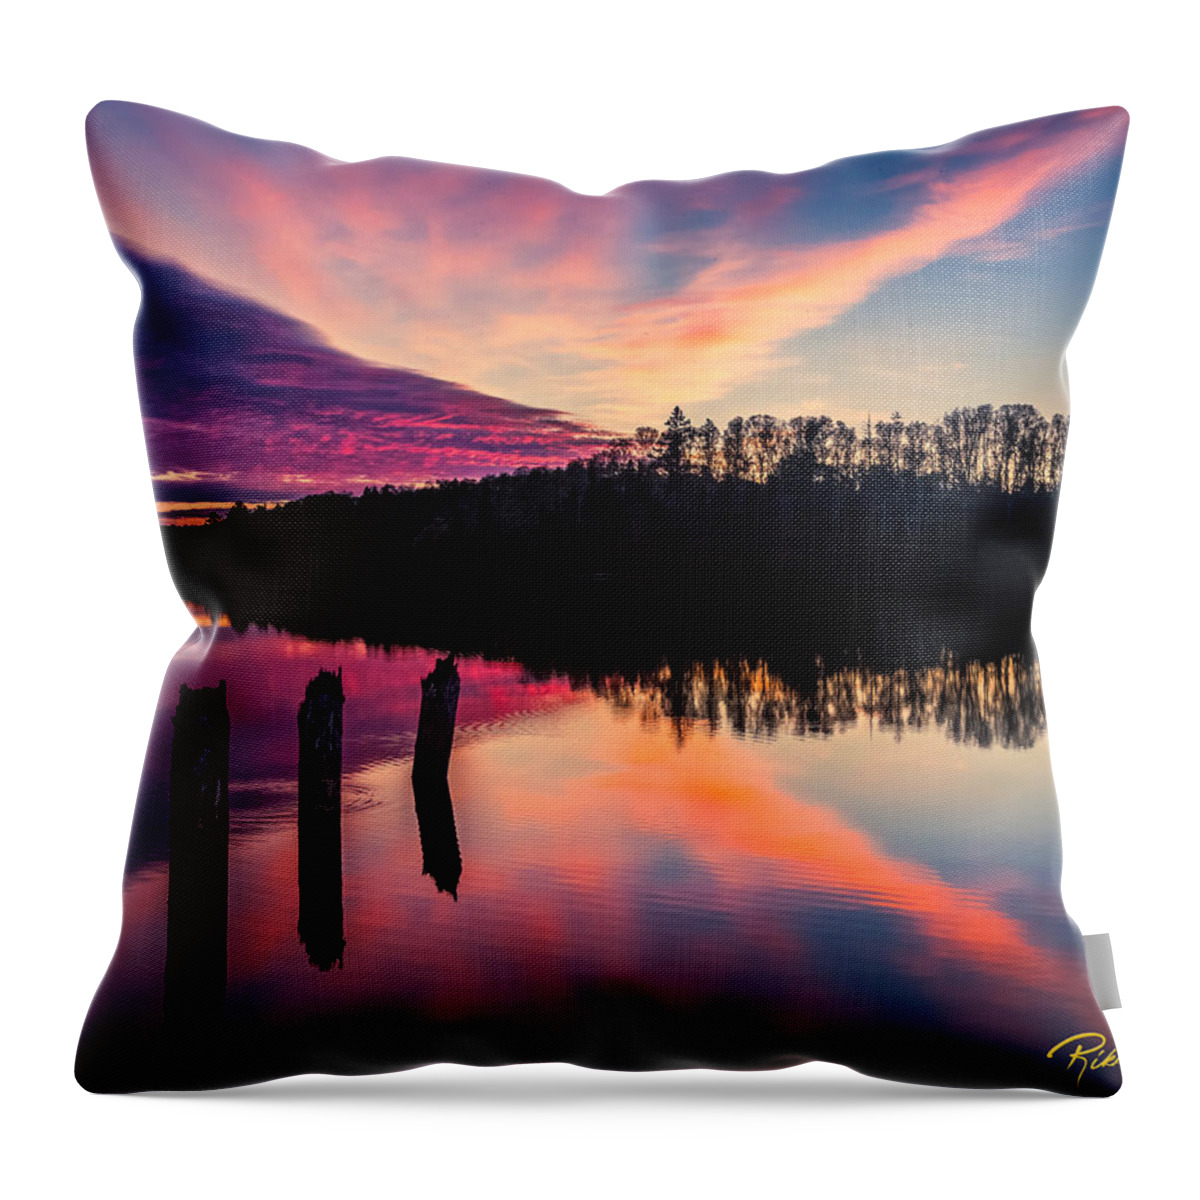 Atmosphere Throw Pillow featuring the photograph Veiled Sunset at Trestle Pines by Rikk Flohr